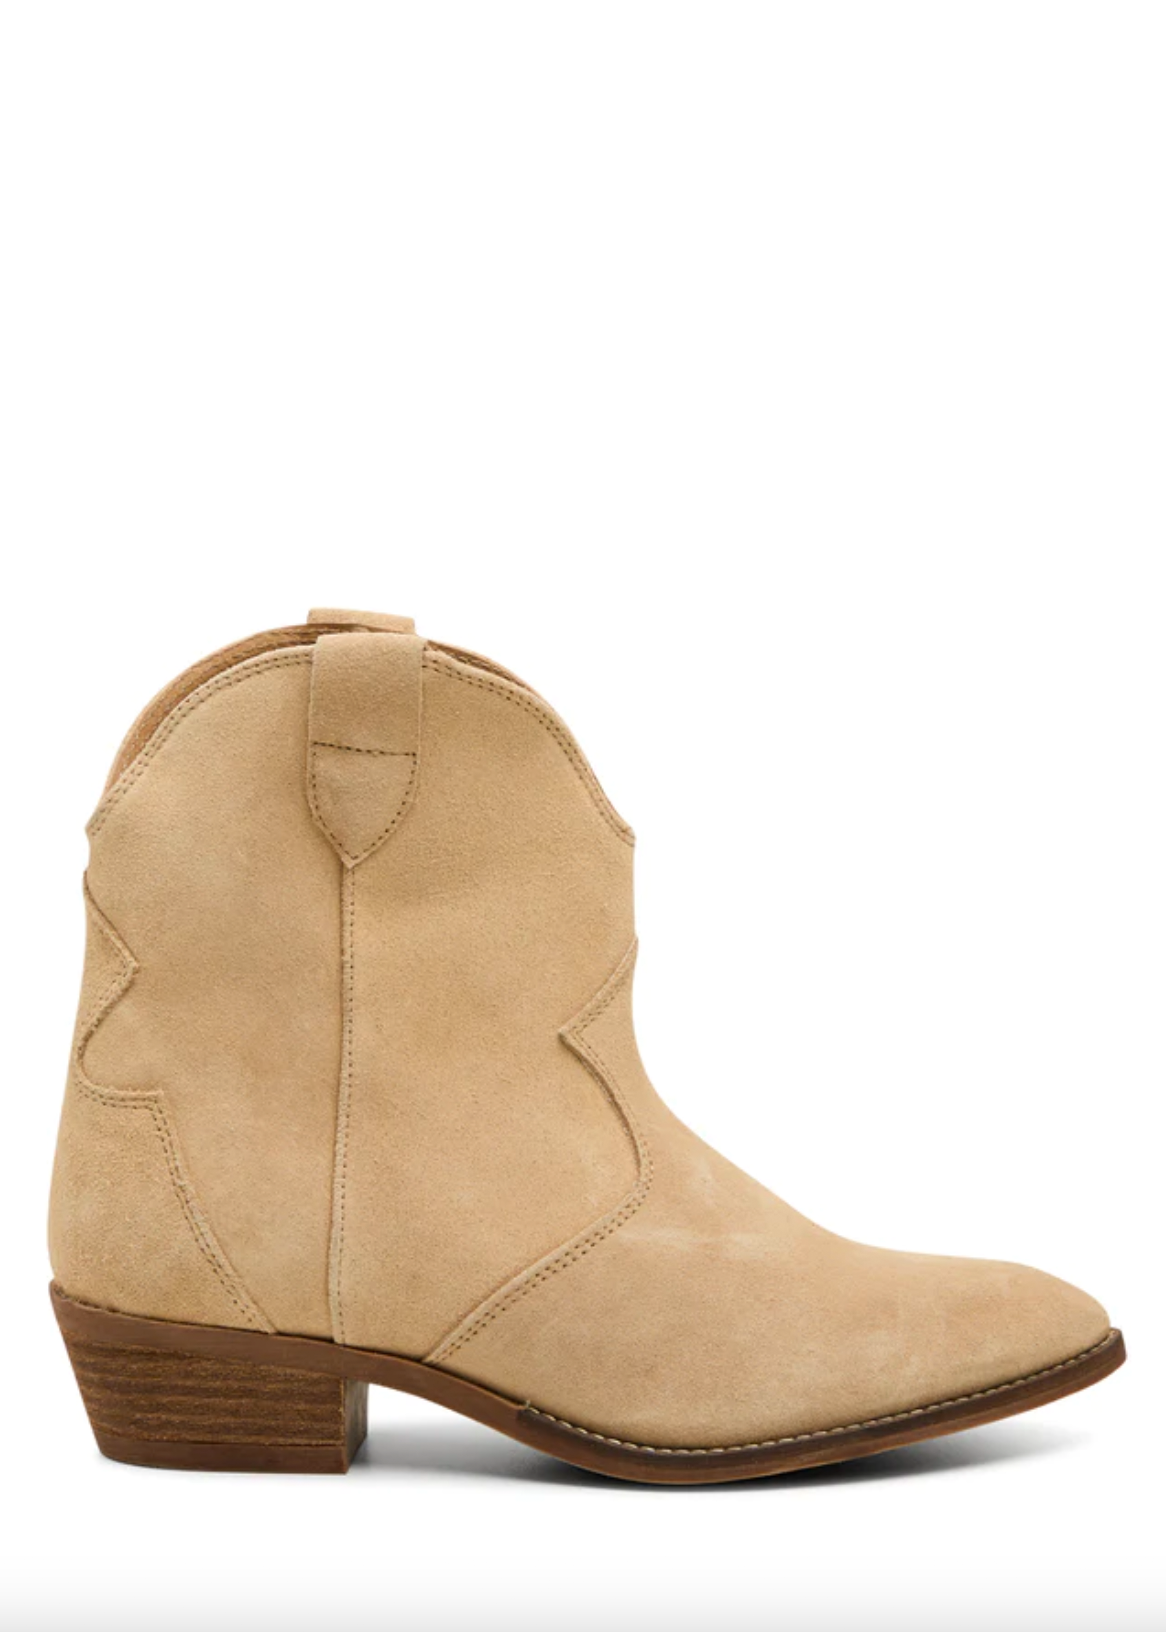 Boots Clarice, Sand Suede Pavement